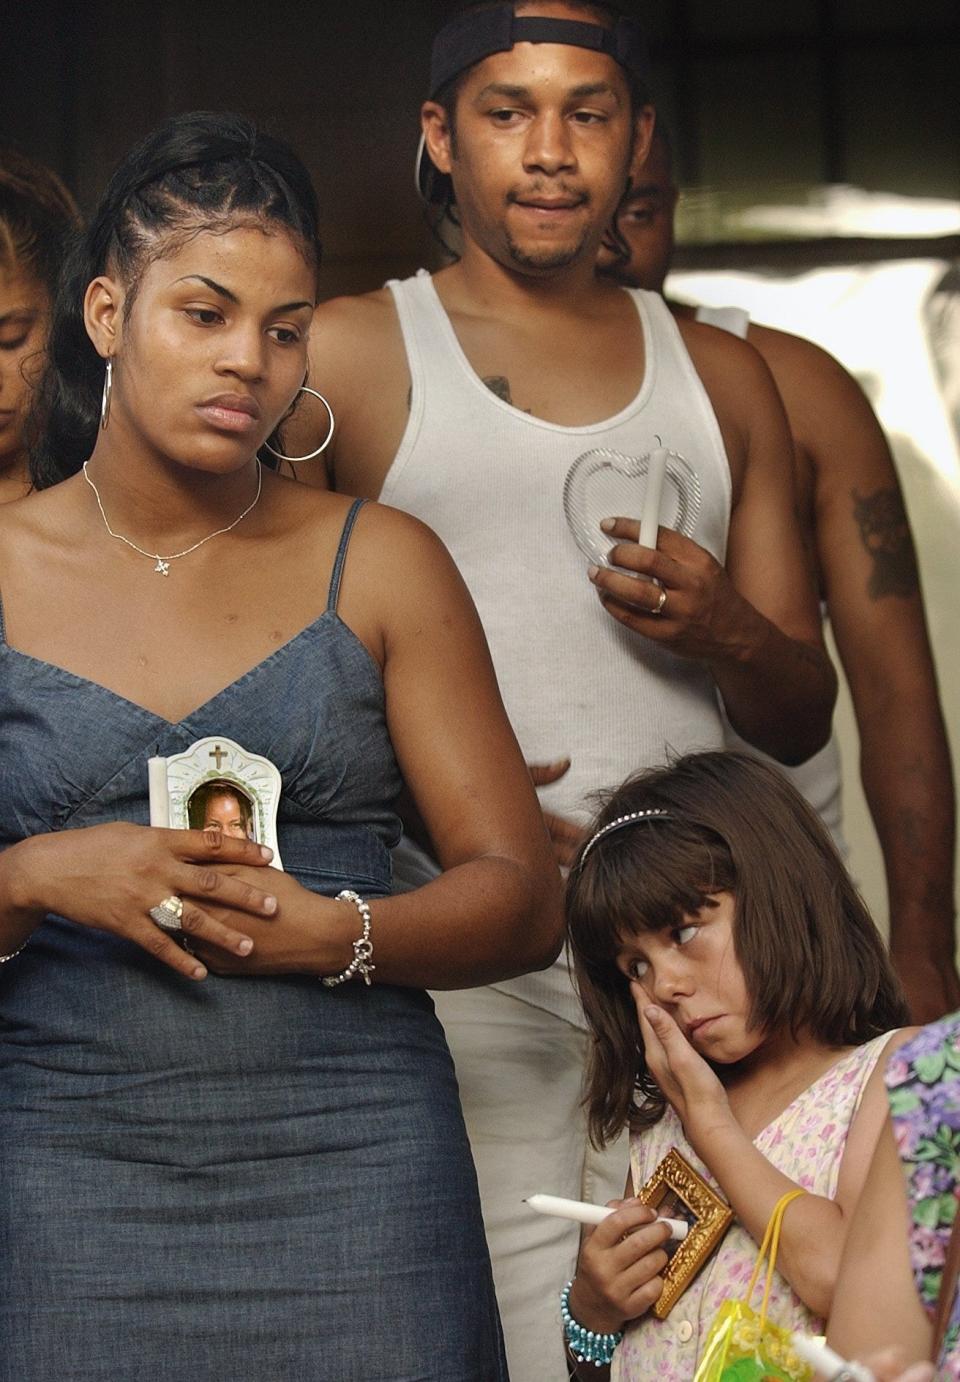 Alexis Patterson's mother, Ayanna Patterson (left), and stepfather, LaRon Bourgeois (center), attend a prayer vigil for their missing daughter. Both had been considered suspects in her disappearance and both had denied involvement.